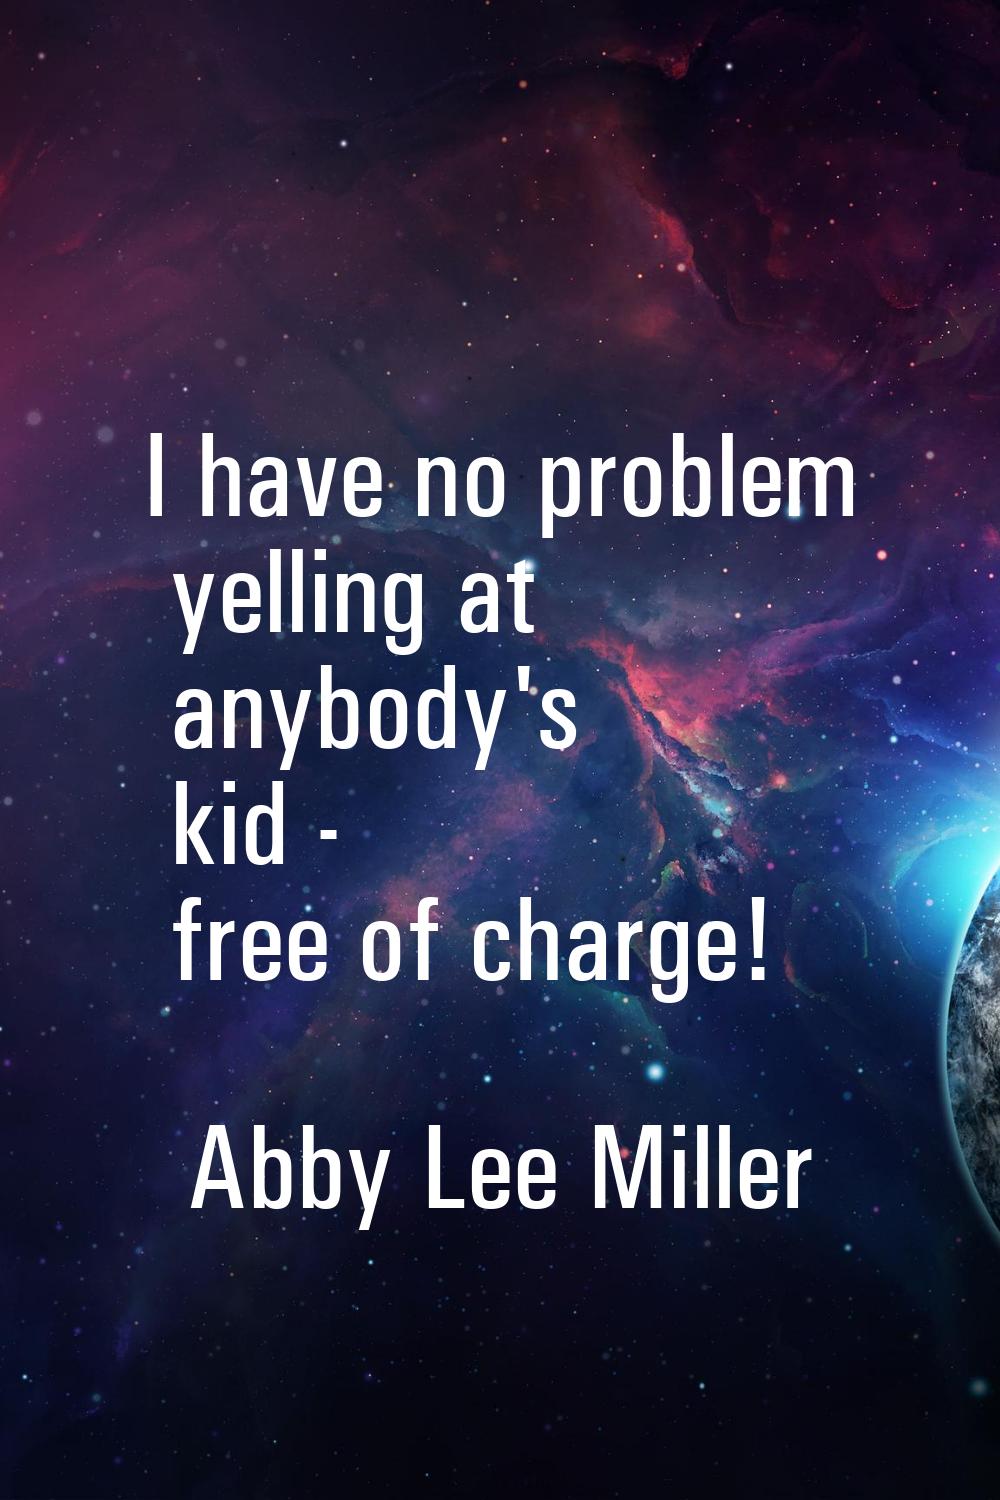 I have no problem yelling at anybody's kid - free of charge!